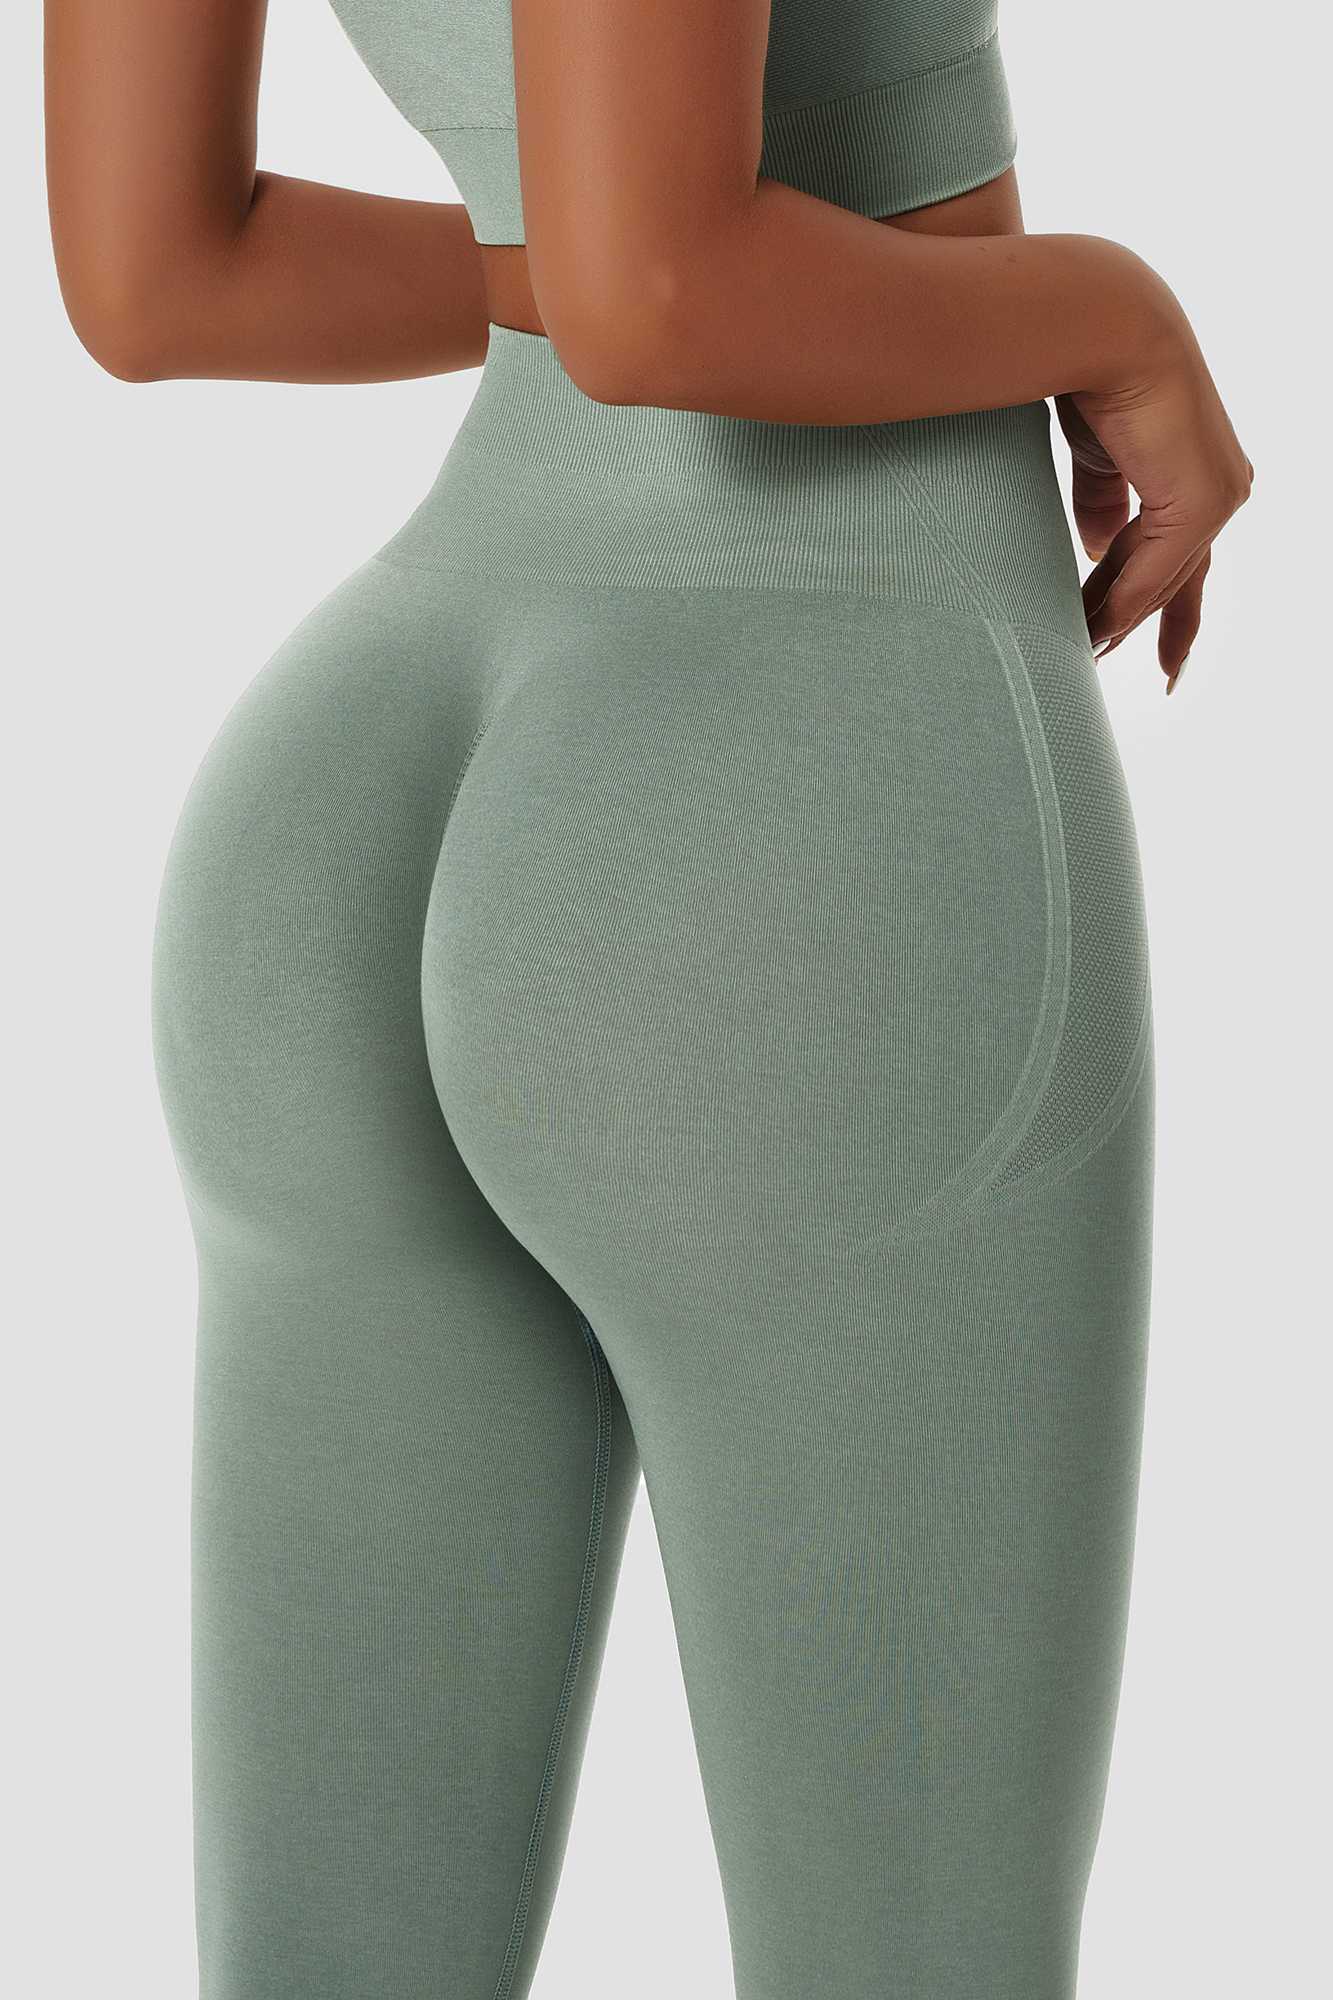 RQYYD Clearance Women Scrunch Butt Lifting Leggings Seamless High Waisted  Workout Yoga Pants Solid Ruched Elastic Tights(Gray,XXL) 